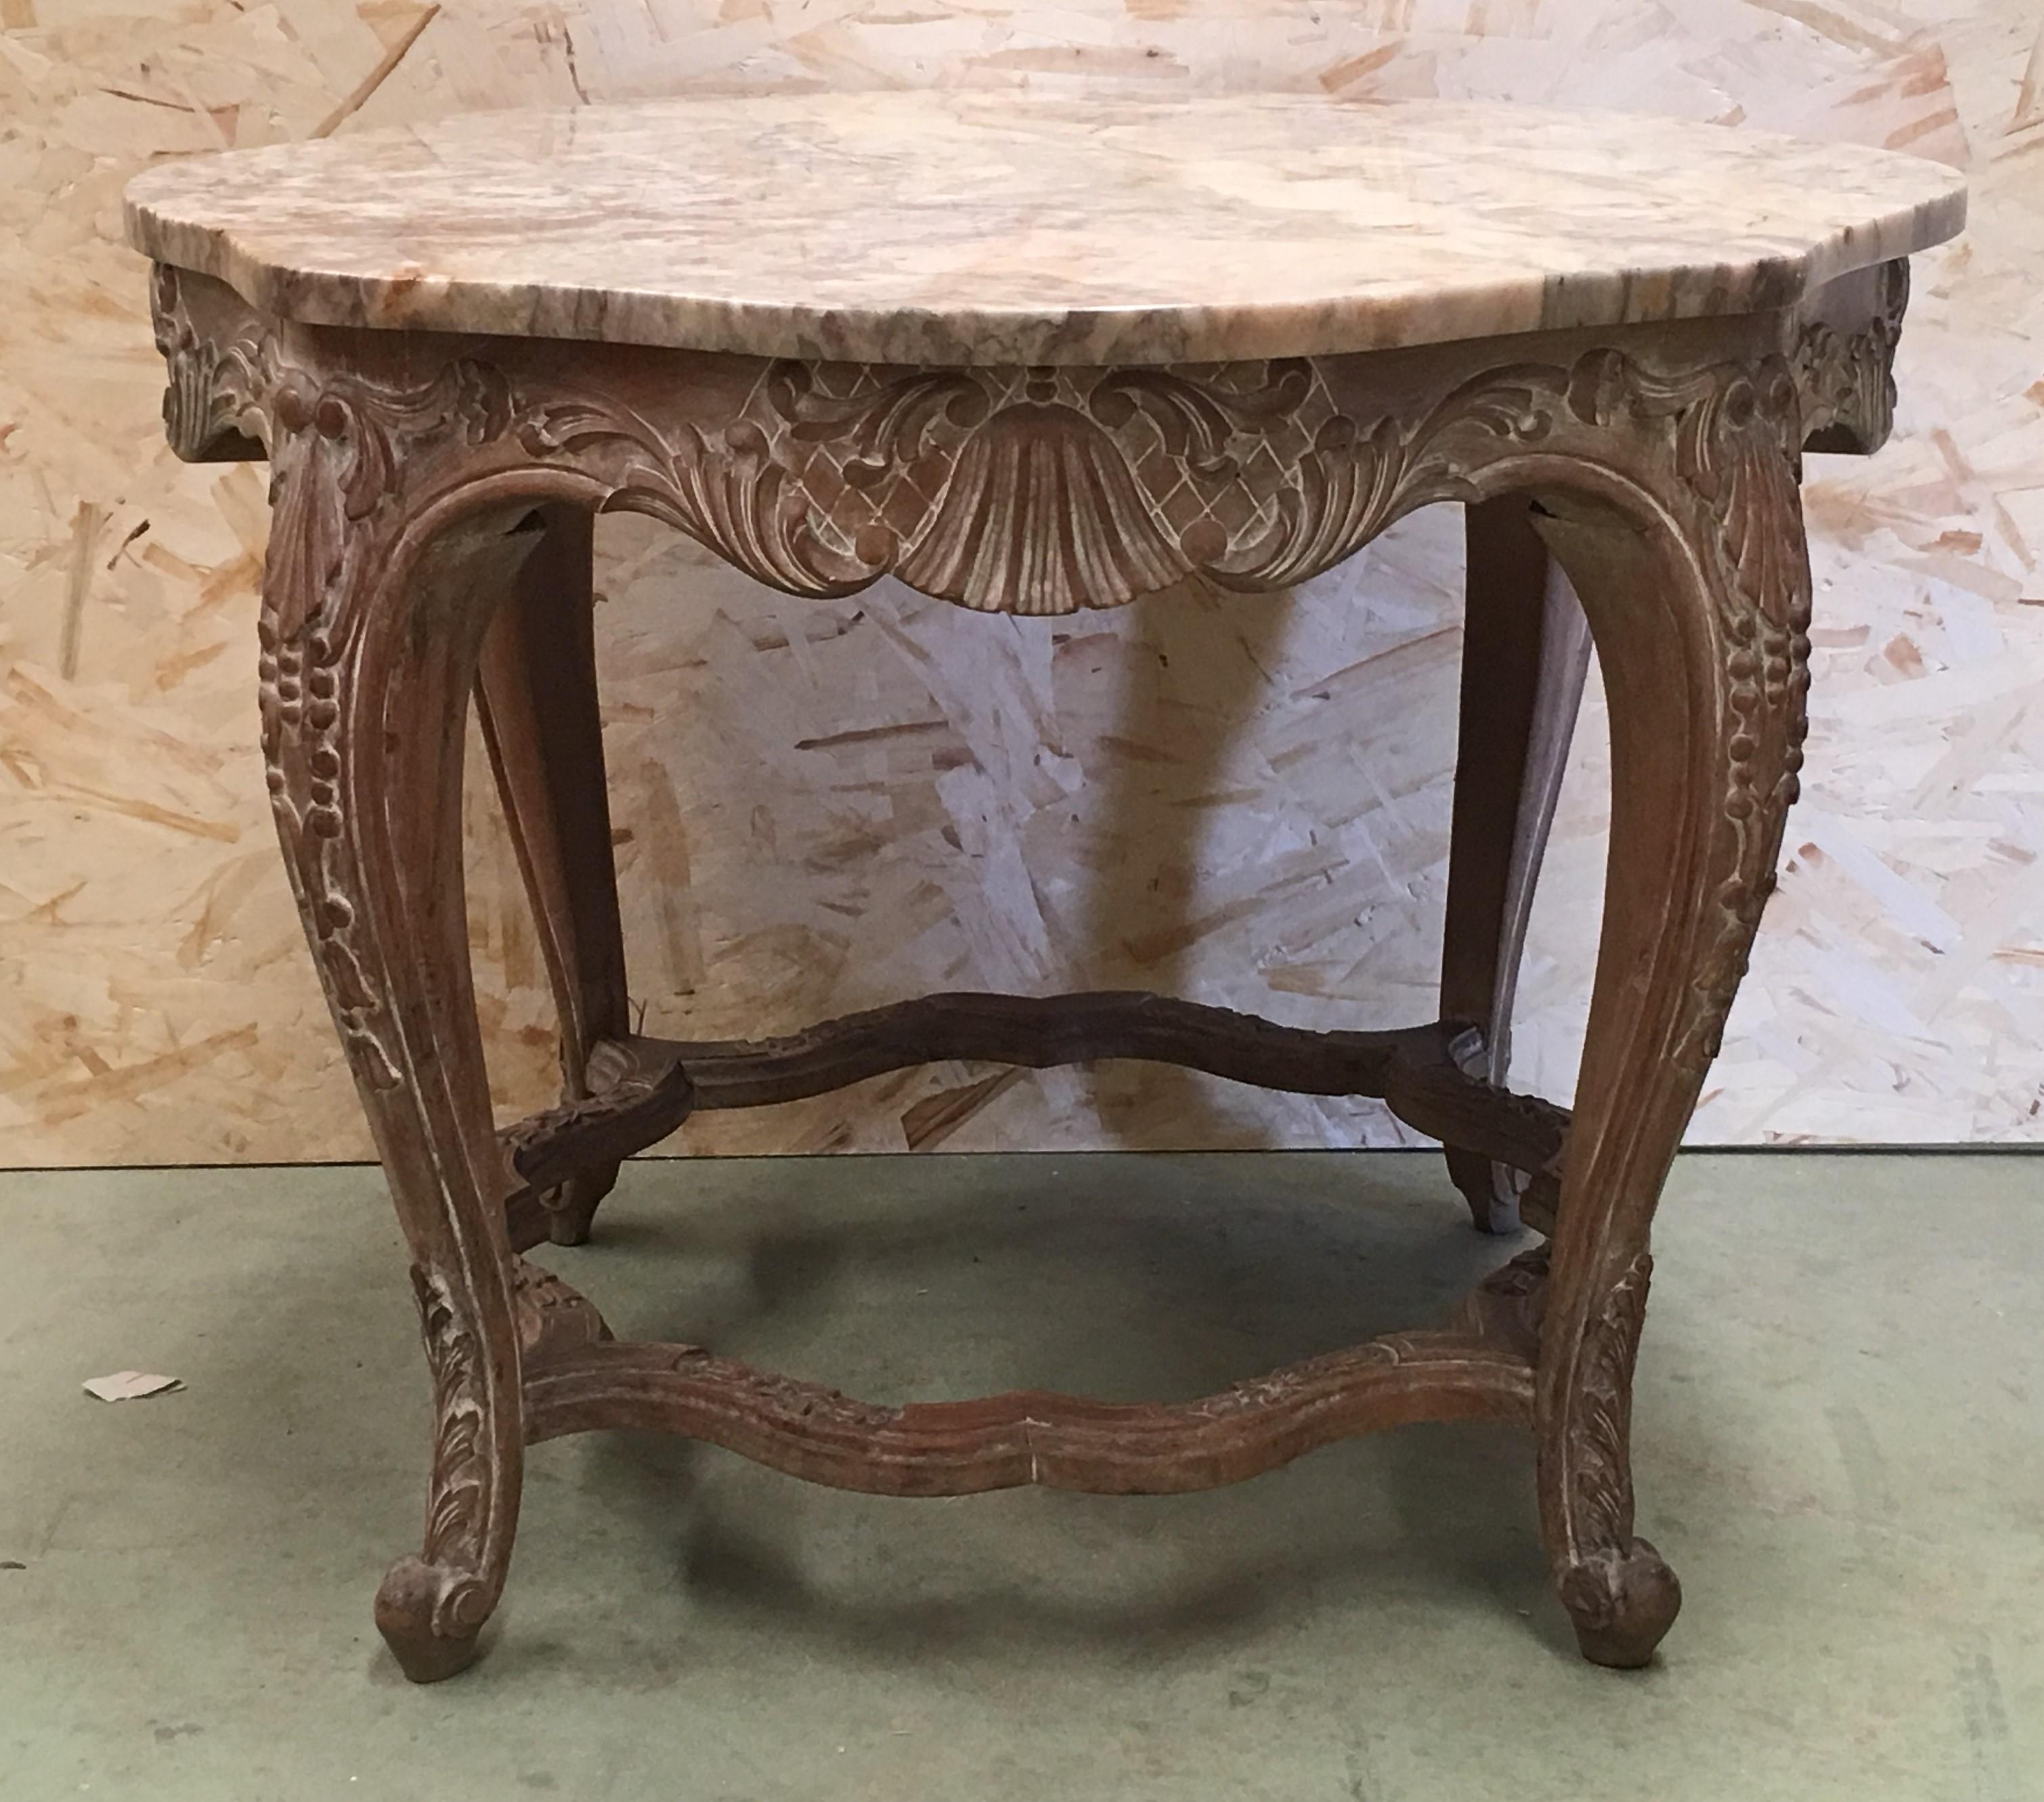 An Italian Rococo style round side table with Siena marble over a richly carved base from the 20th century. This exquisite Spanish side table features a “giallo Siena” marble top (yellow veined marble) over a hand-carved, painted base. The apron is